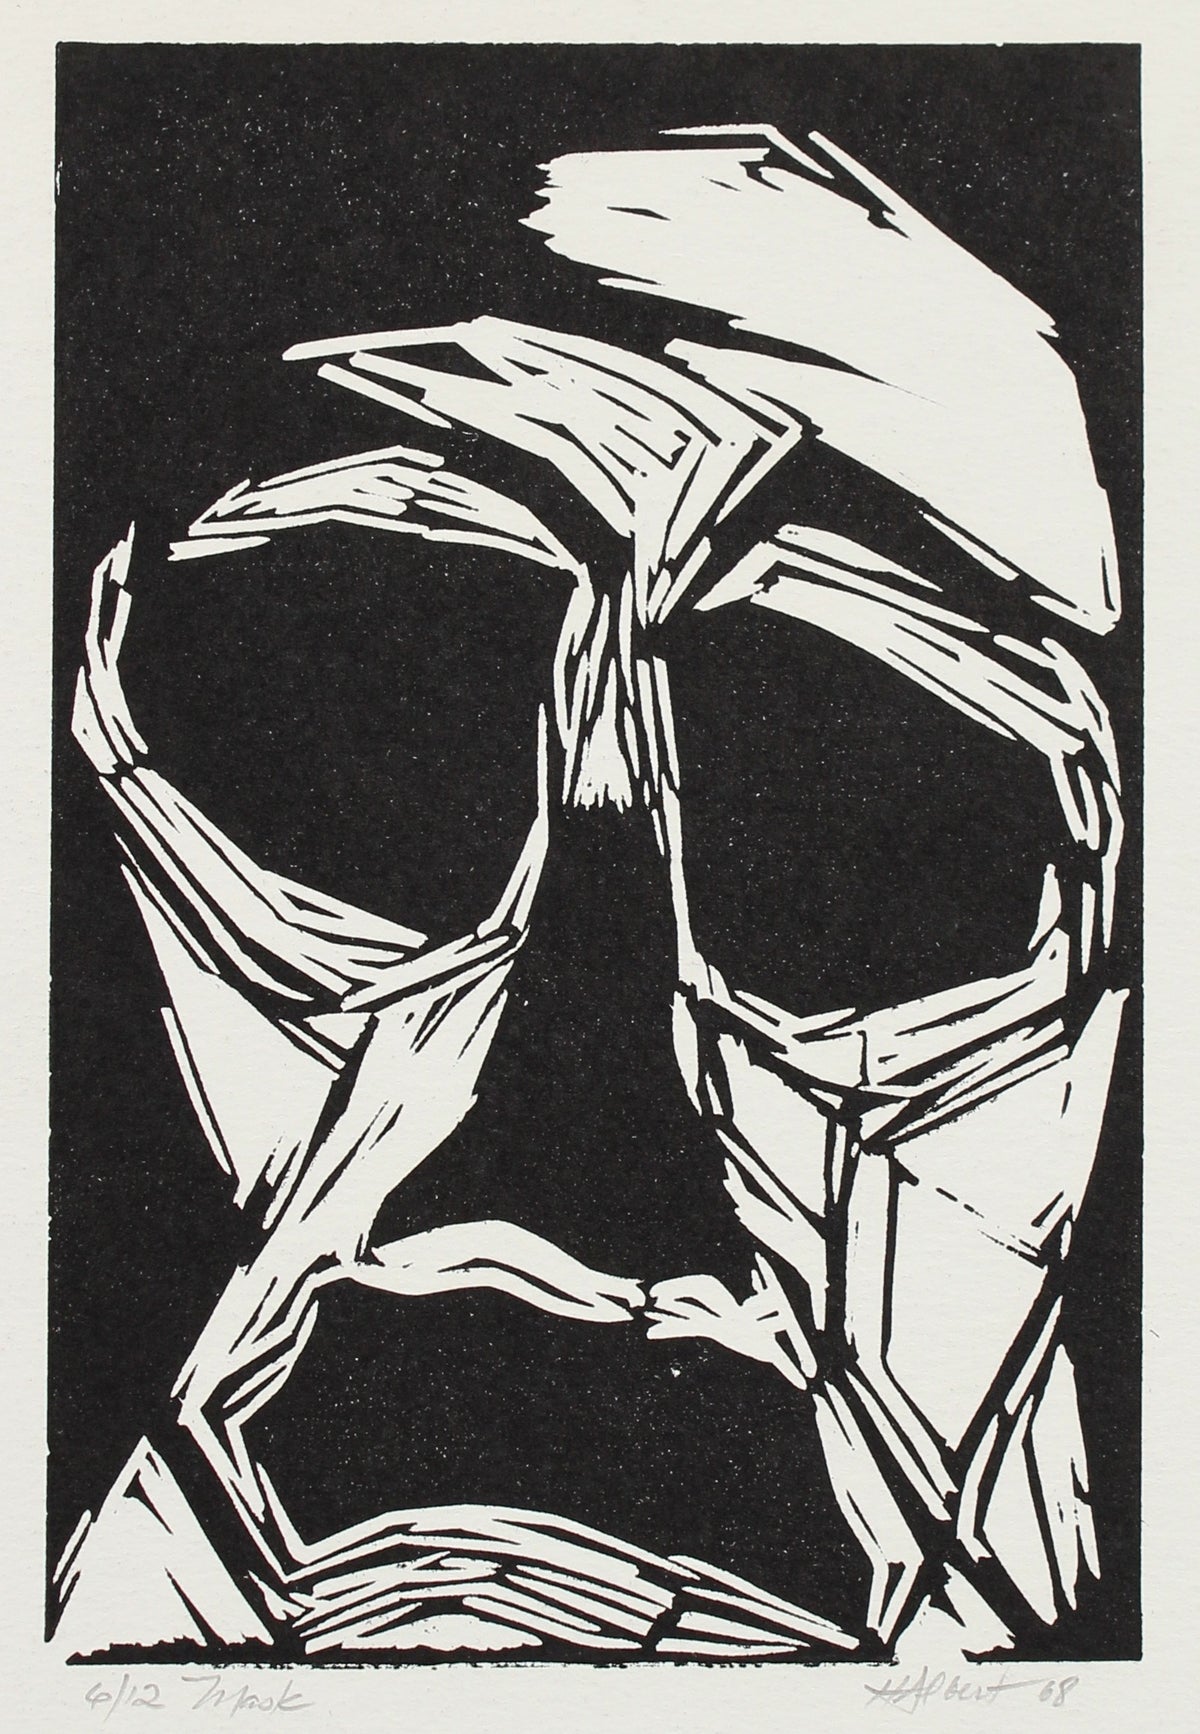 &lt;i&gt;Mask&lt;/i&gt;&lt;br&gt;1968 Wood Block&lt;br&gt;&lt;br&gt;#2149A